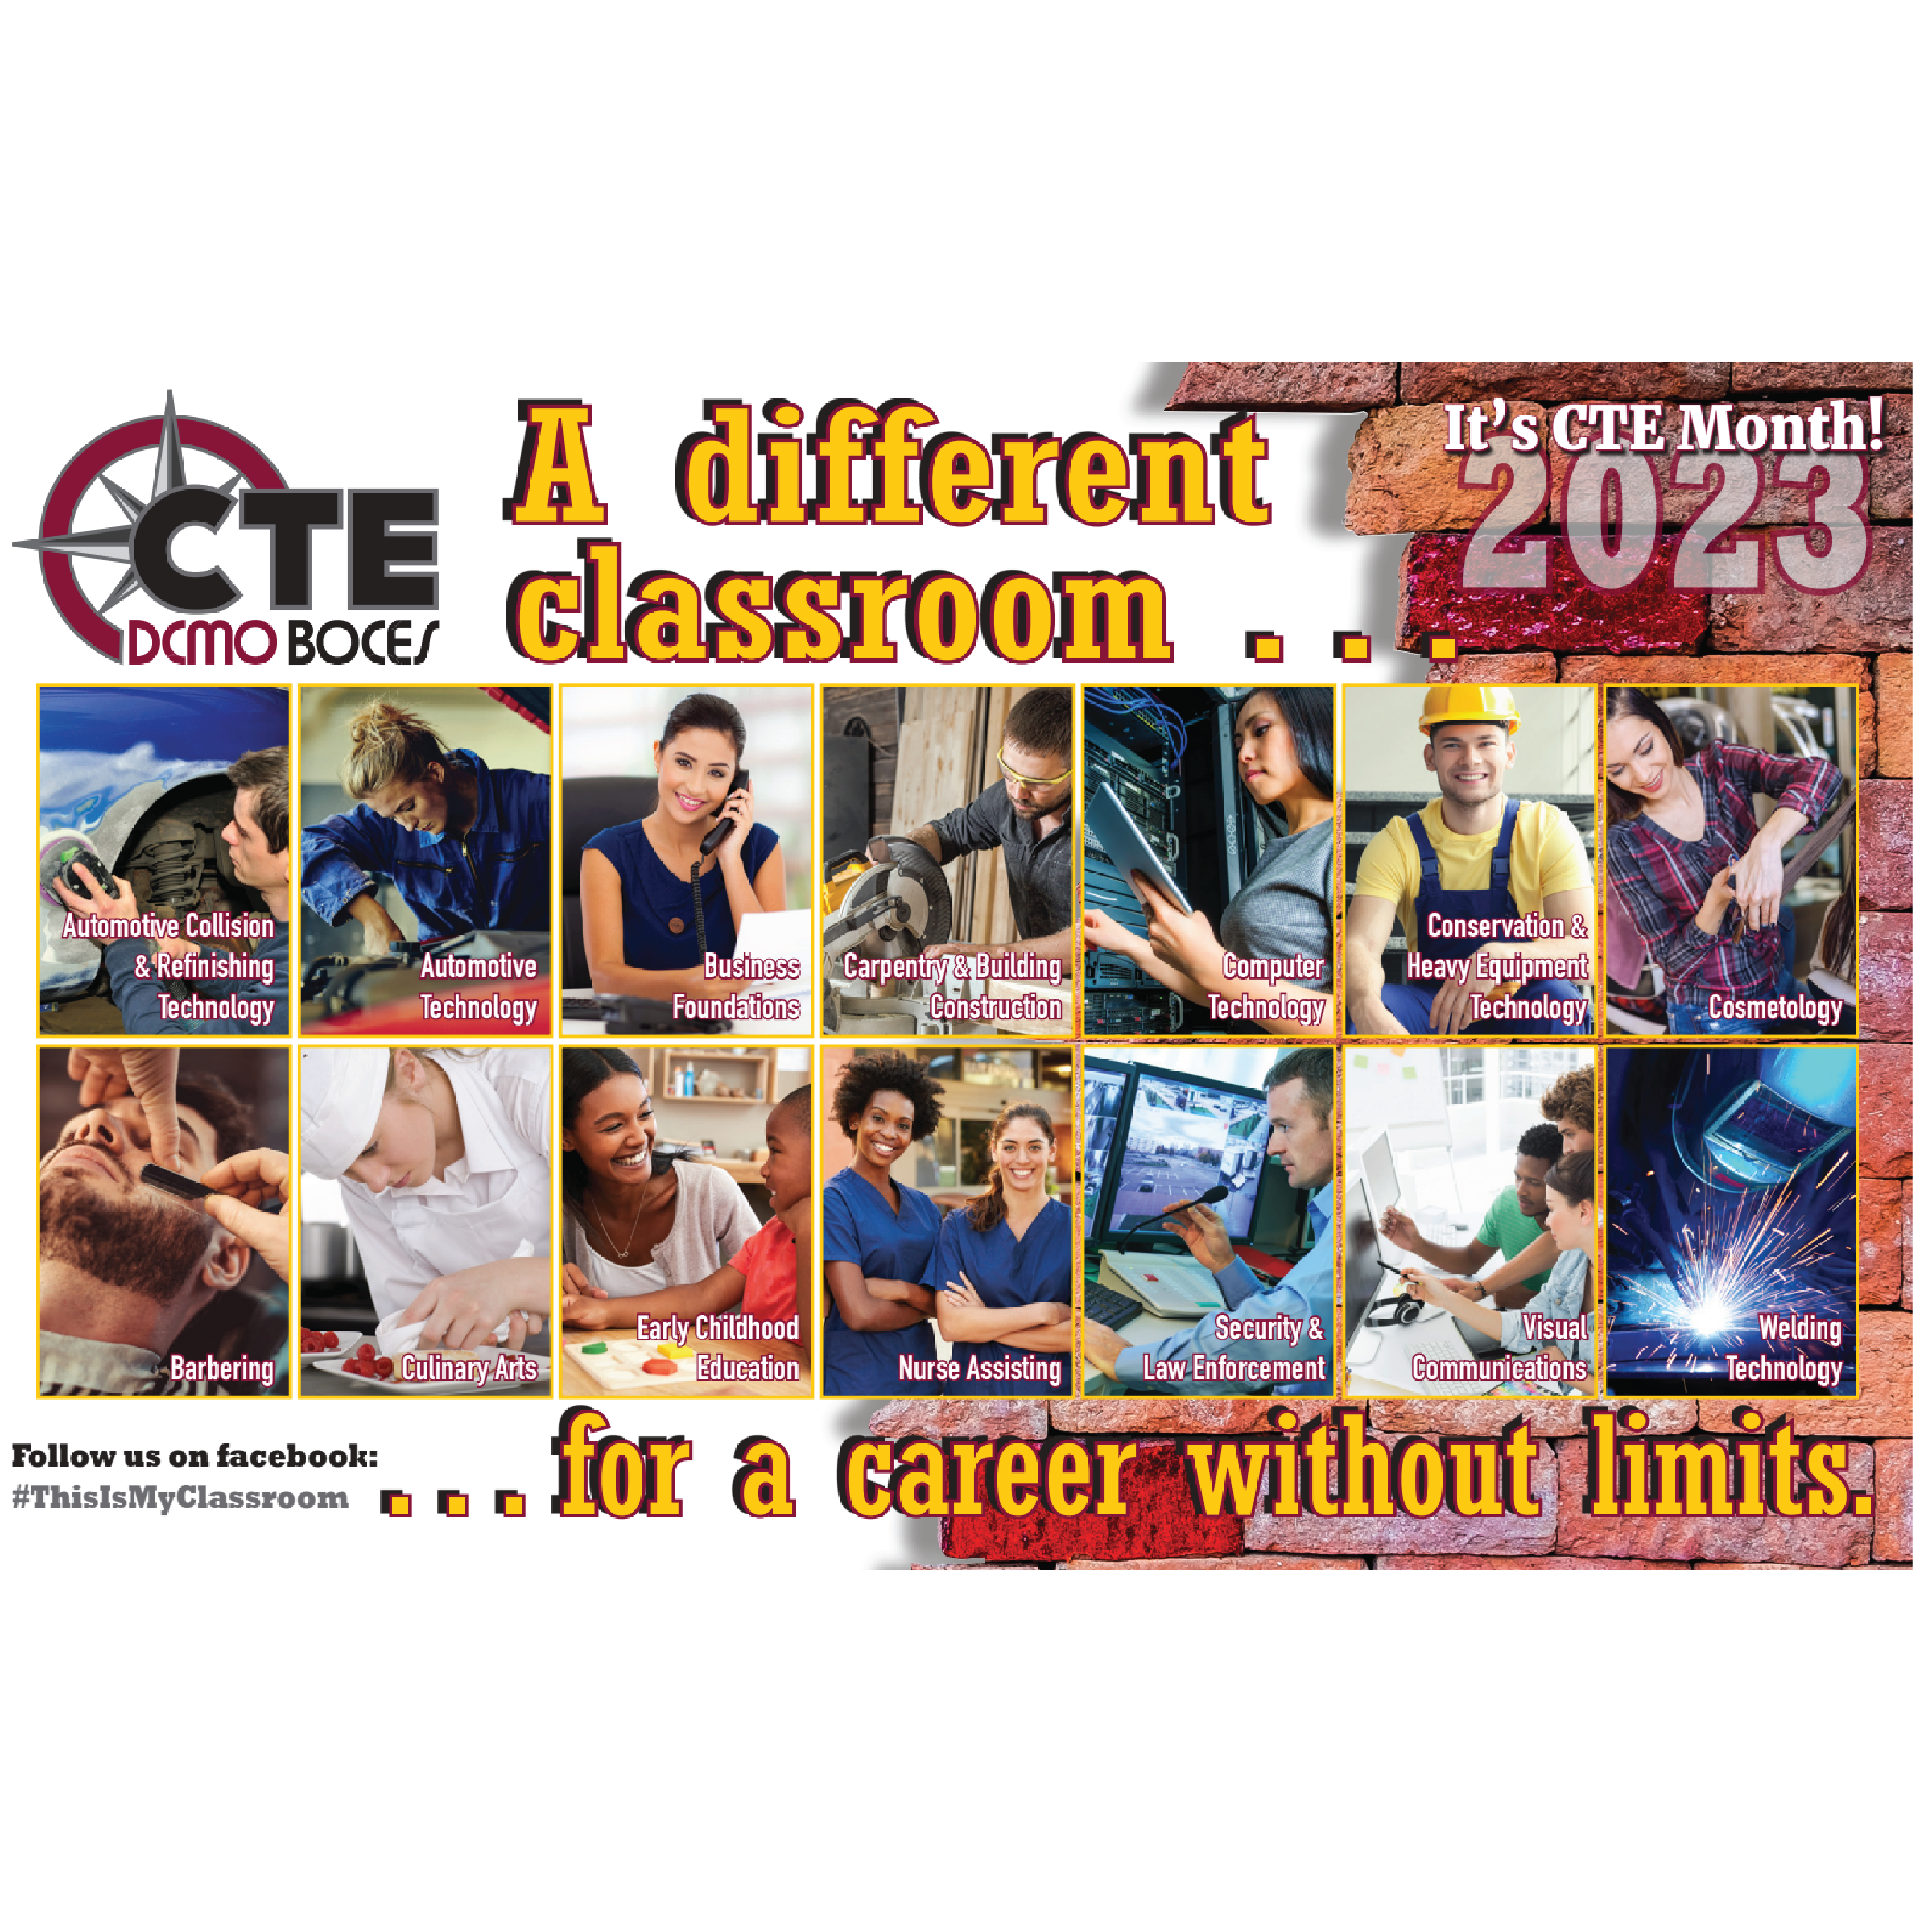 DCMO BOCES "This is My Classroom" postcard 2023